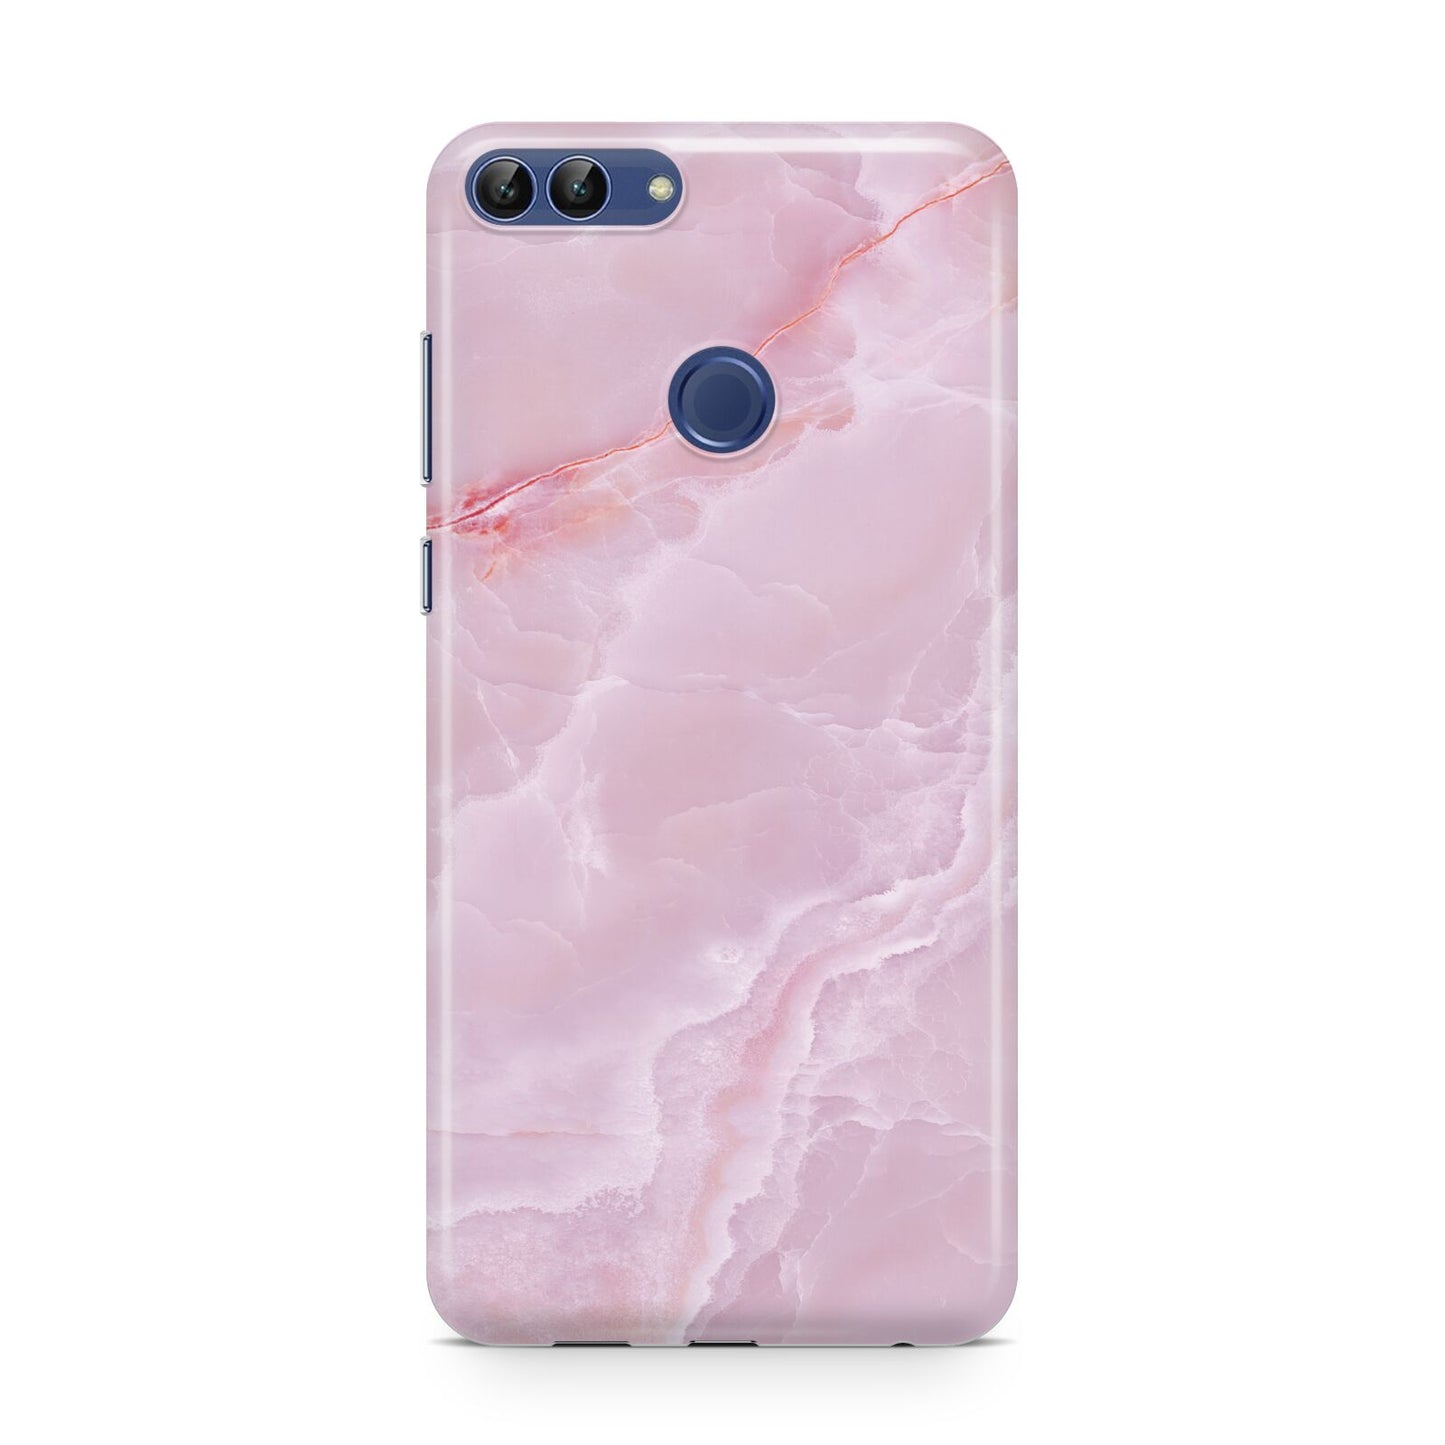 Dreamy Pink Marble Huawei P Smart Case